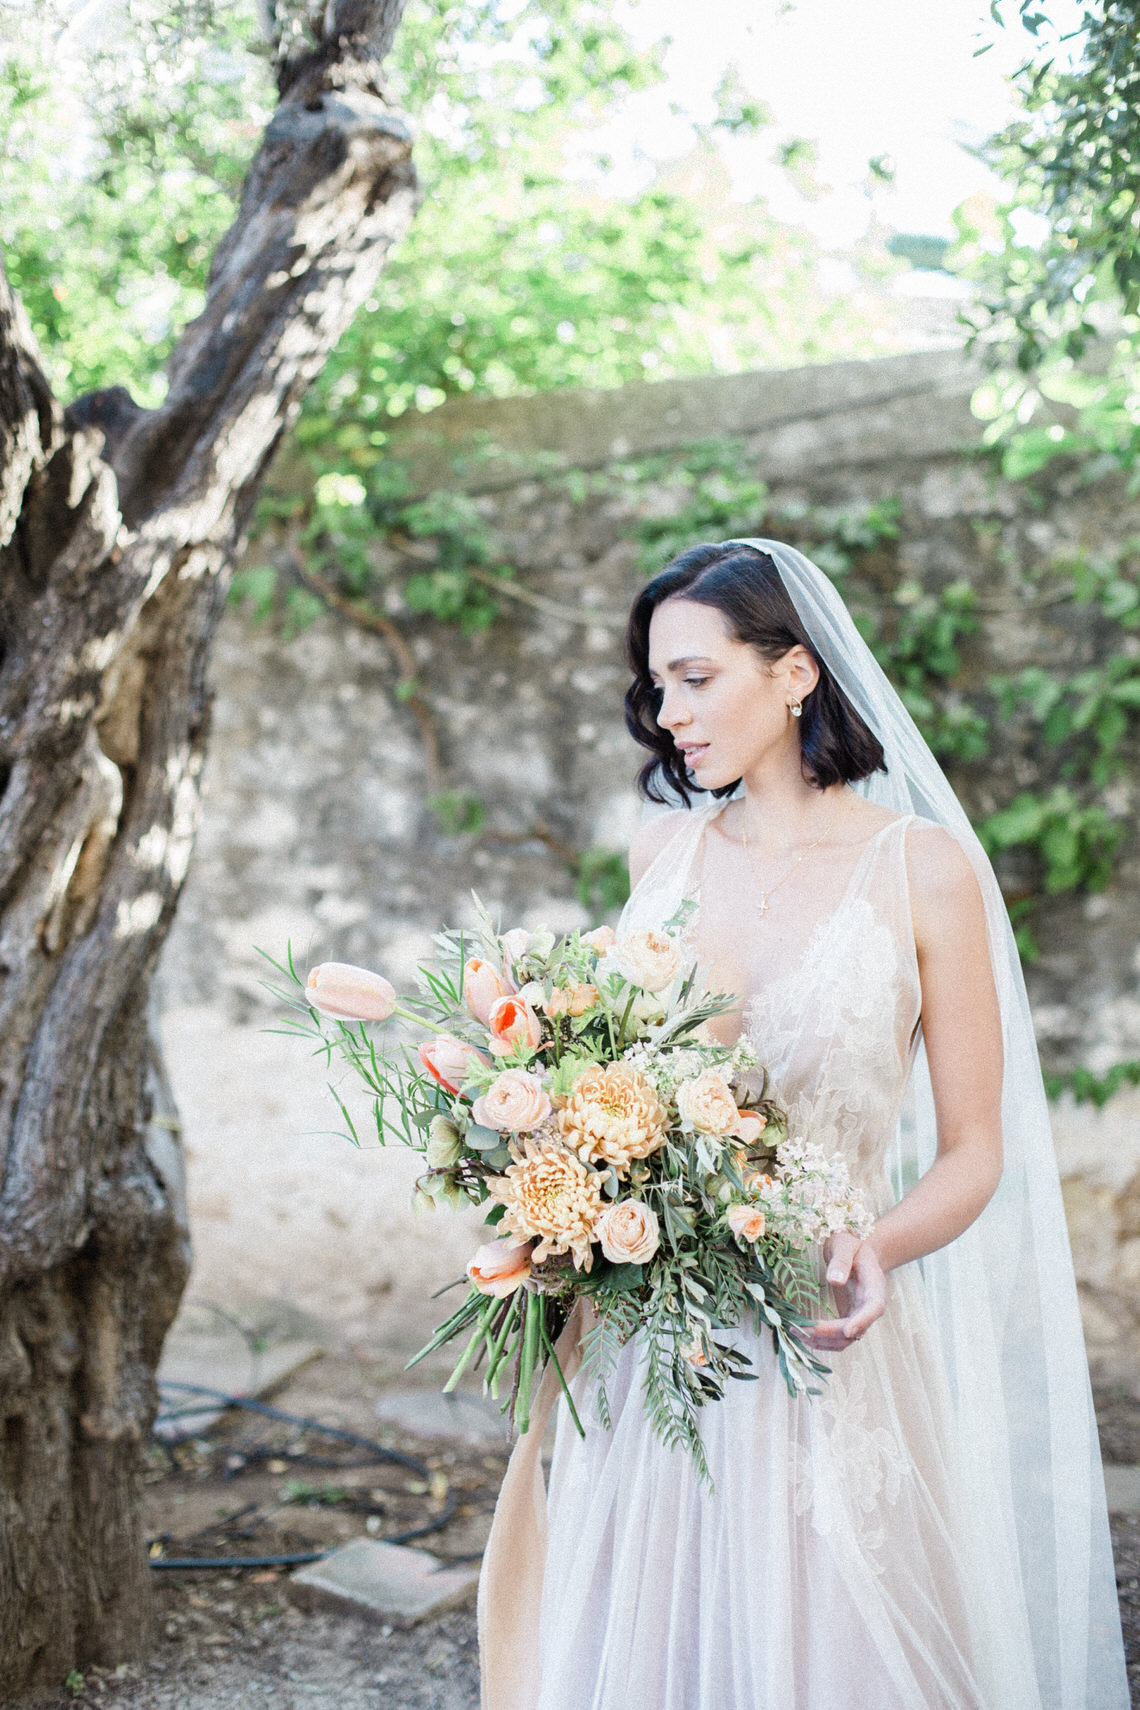 Whimsical Romantic Wedding Inspiration With Grace Kelly Vibes – Fiorello Photography 37